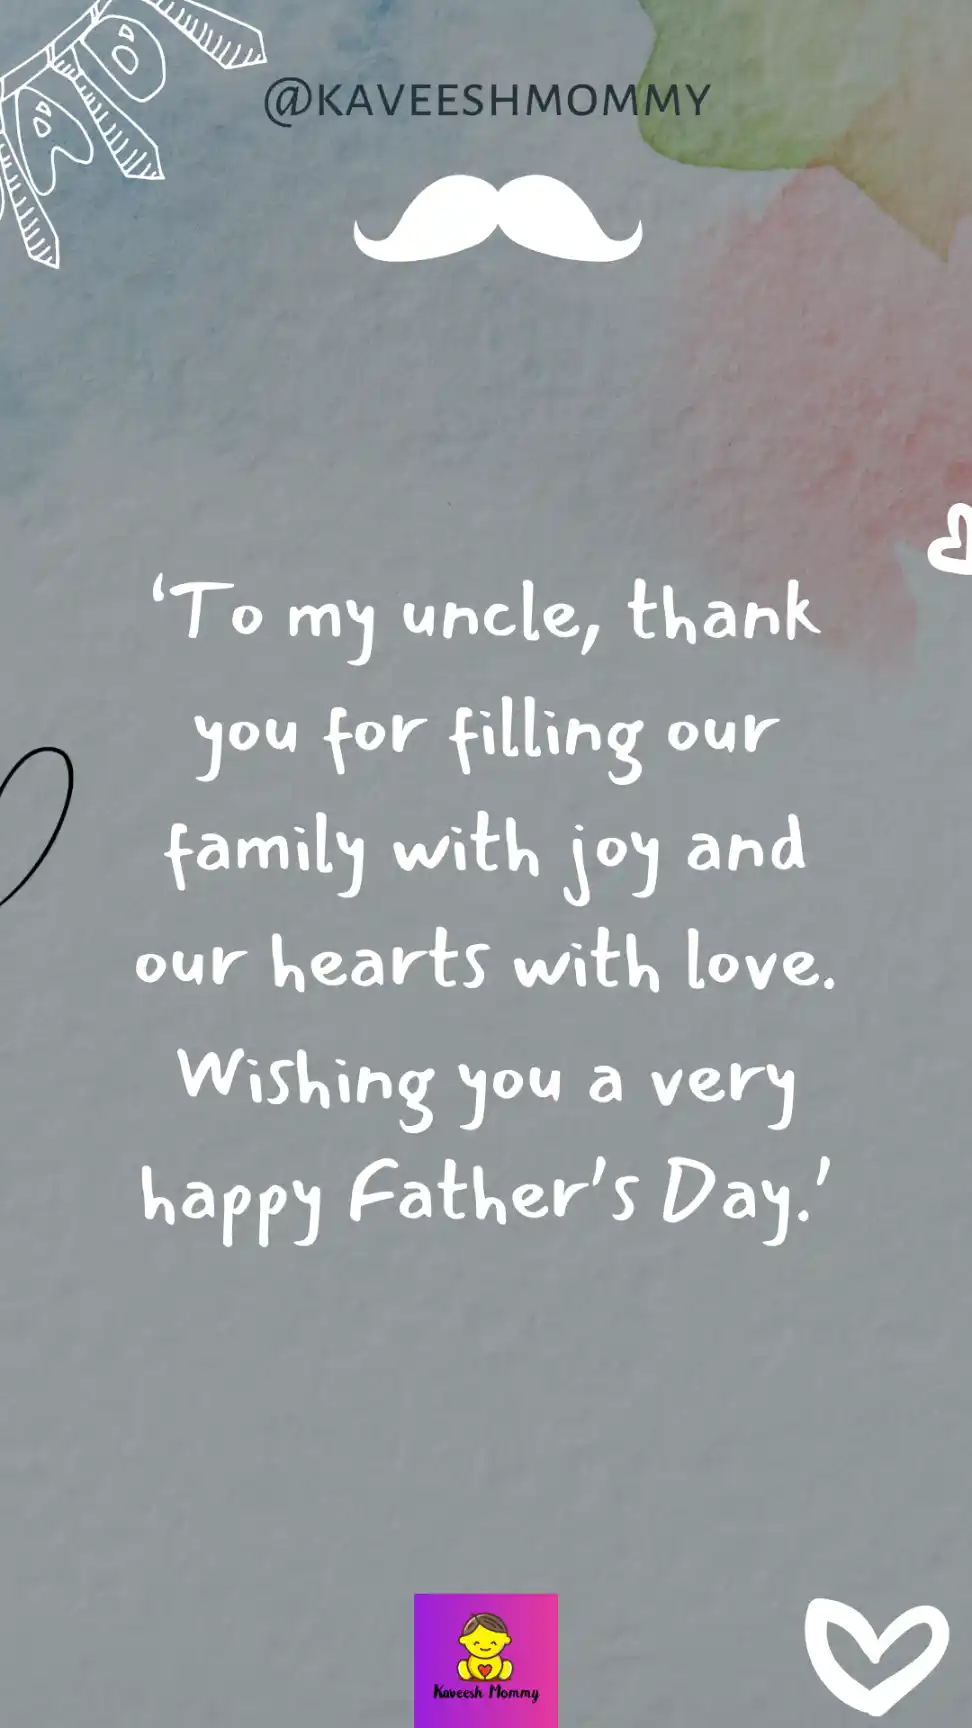 Father's Day greetings to my Uncle